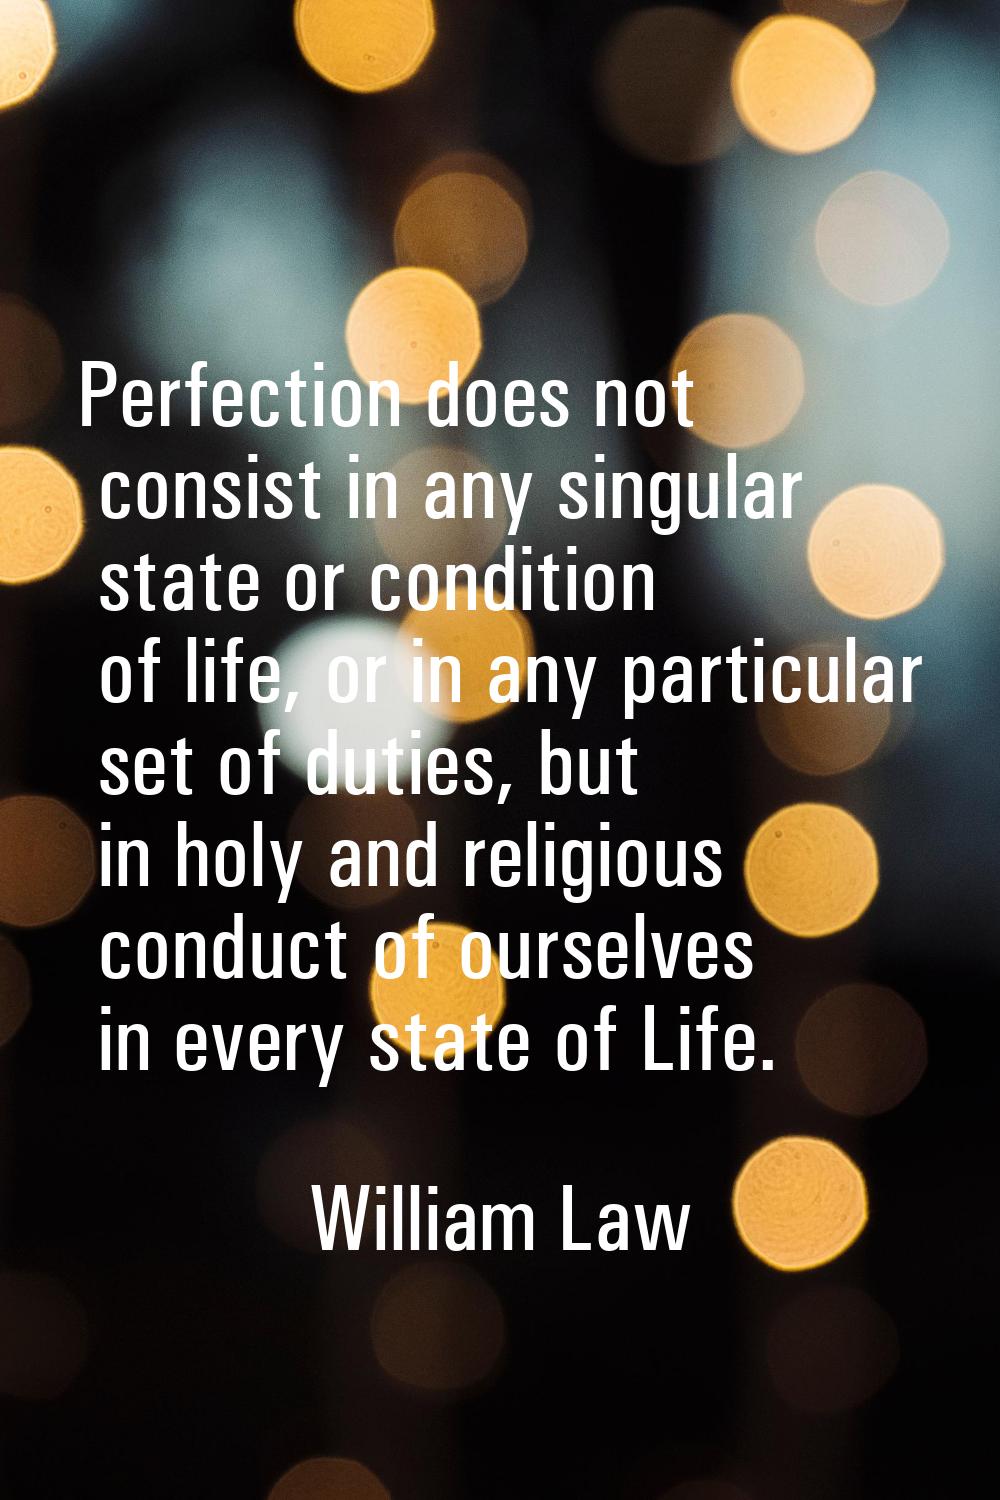 Perfection does not consist in any singular state or condition of life, or in any particular set of